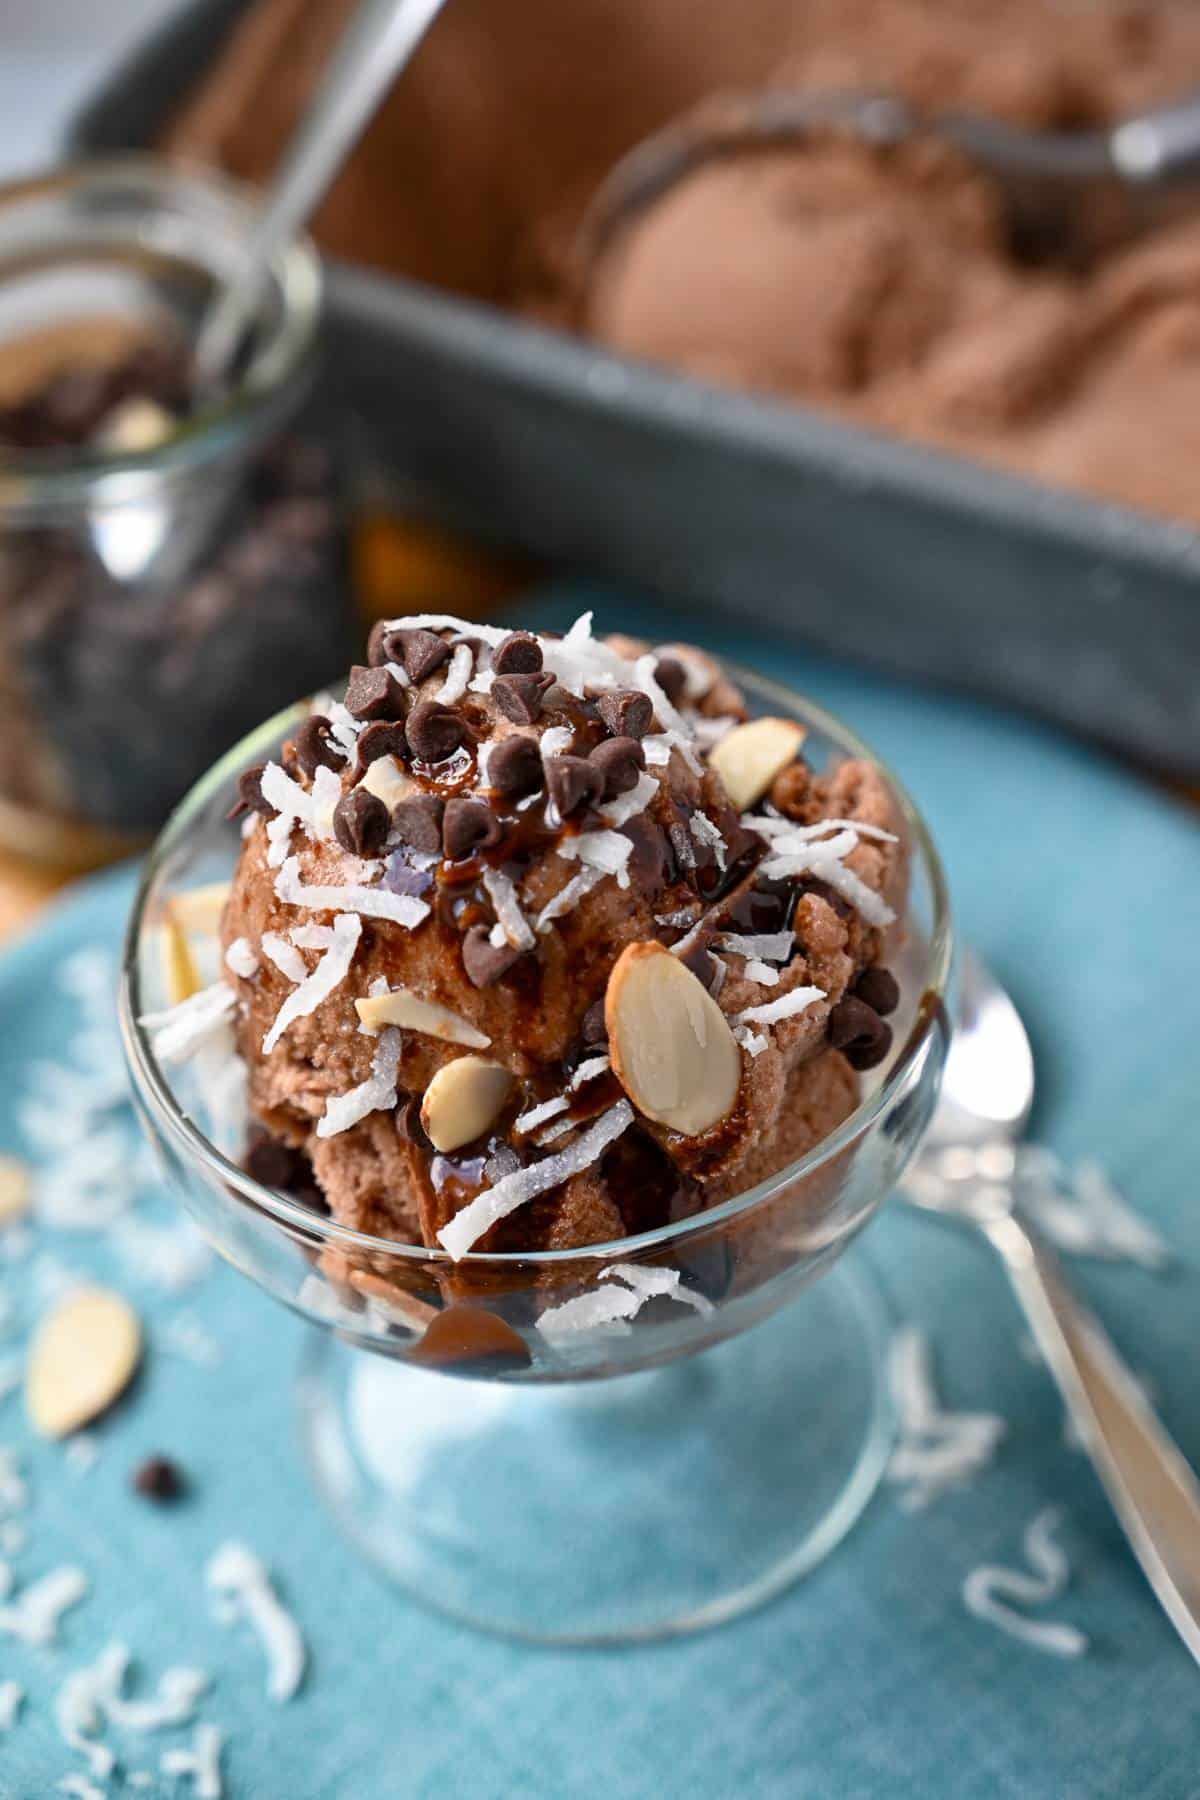 a parfait dish of chocolate vegan ice cream with almond joy inspired toppings